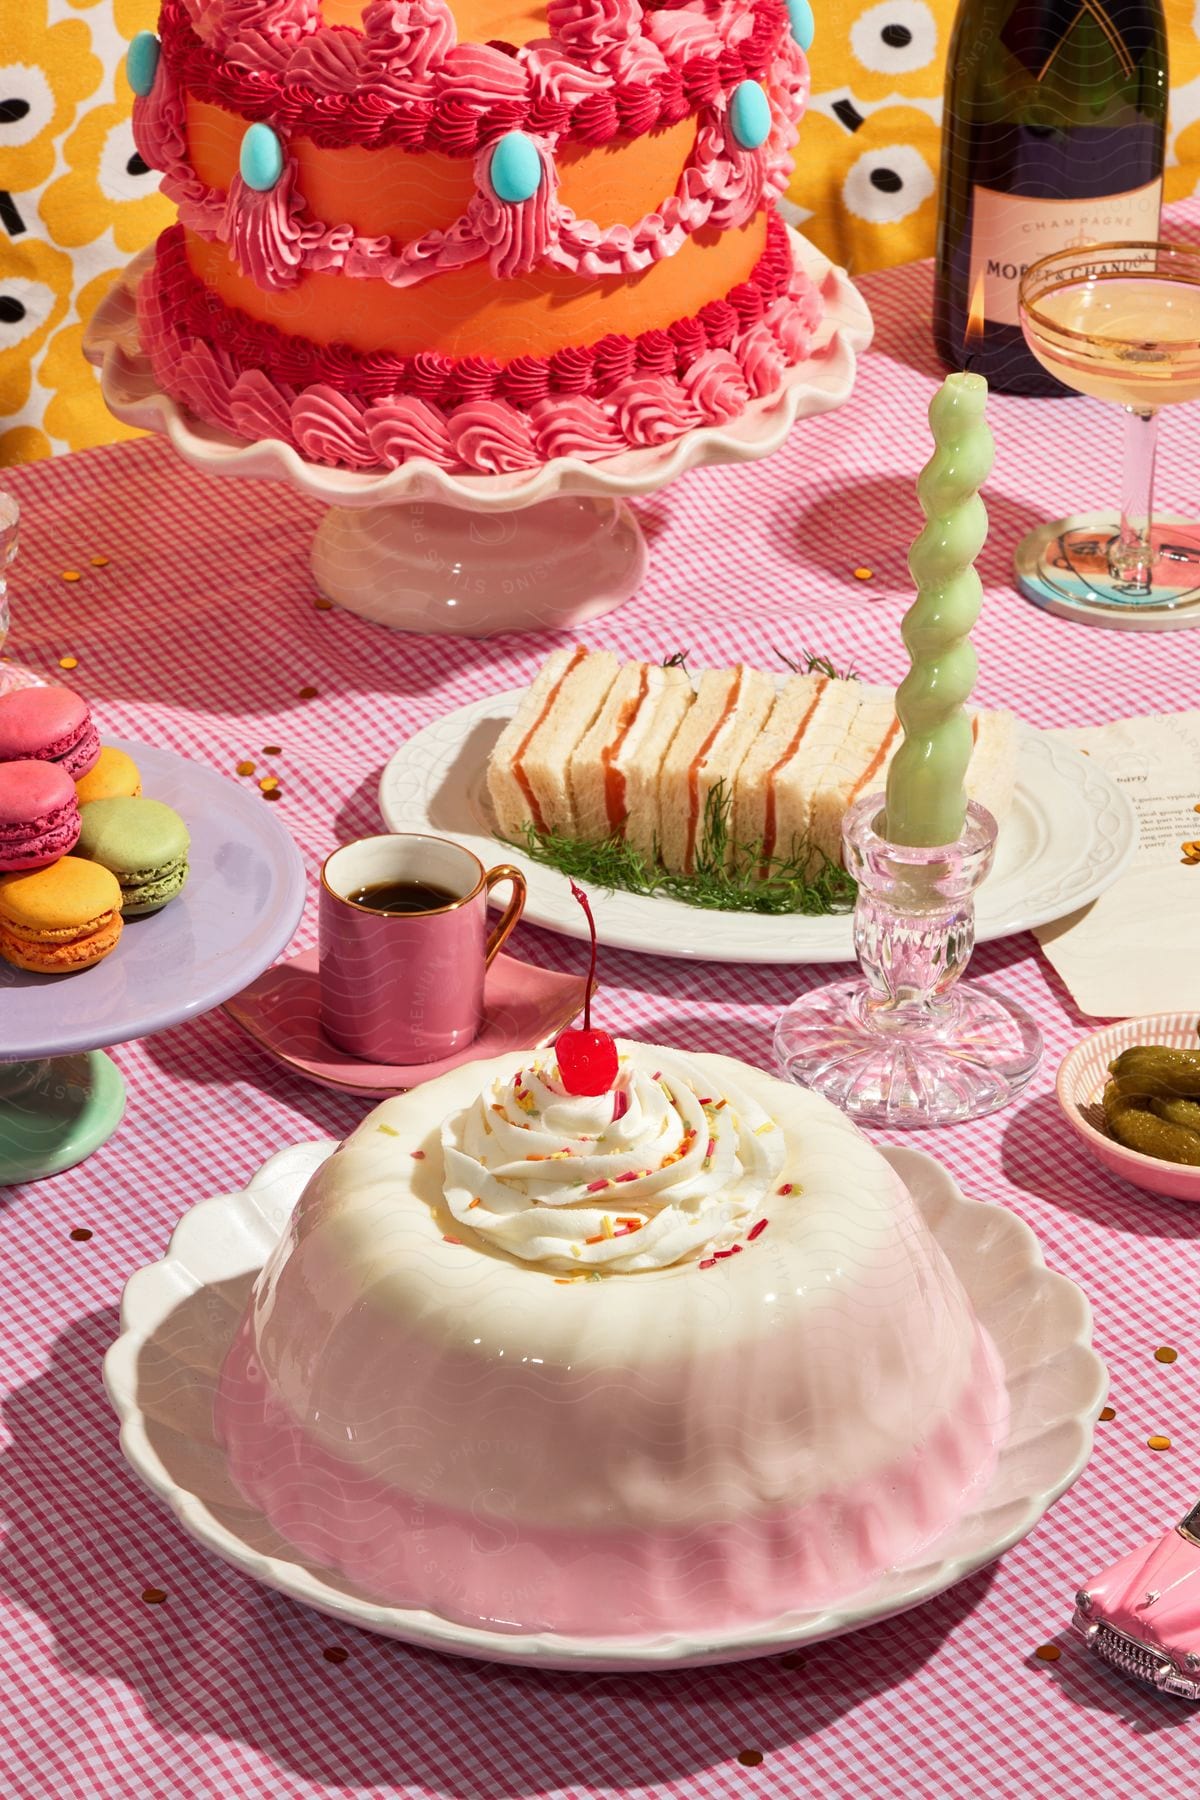 A set table with a birthday cake, white pudding, macaroons, finger sandwiches, coffee and white wine.